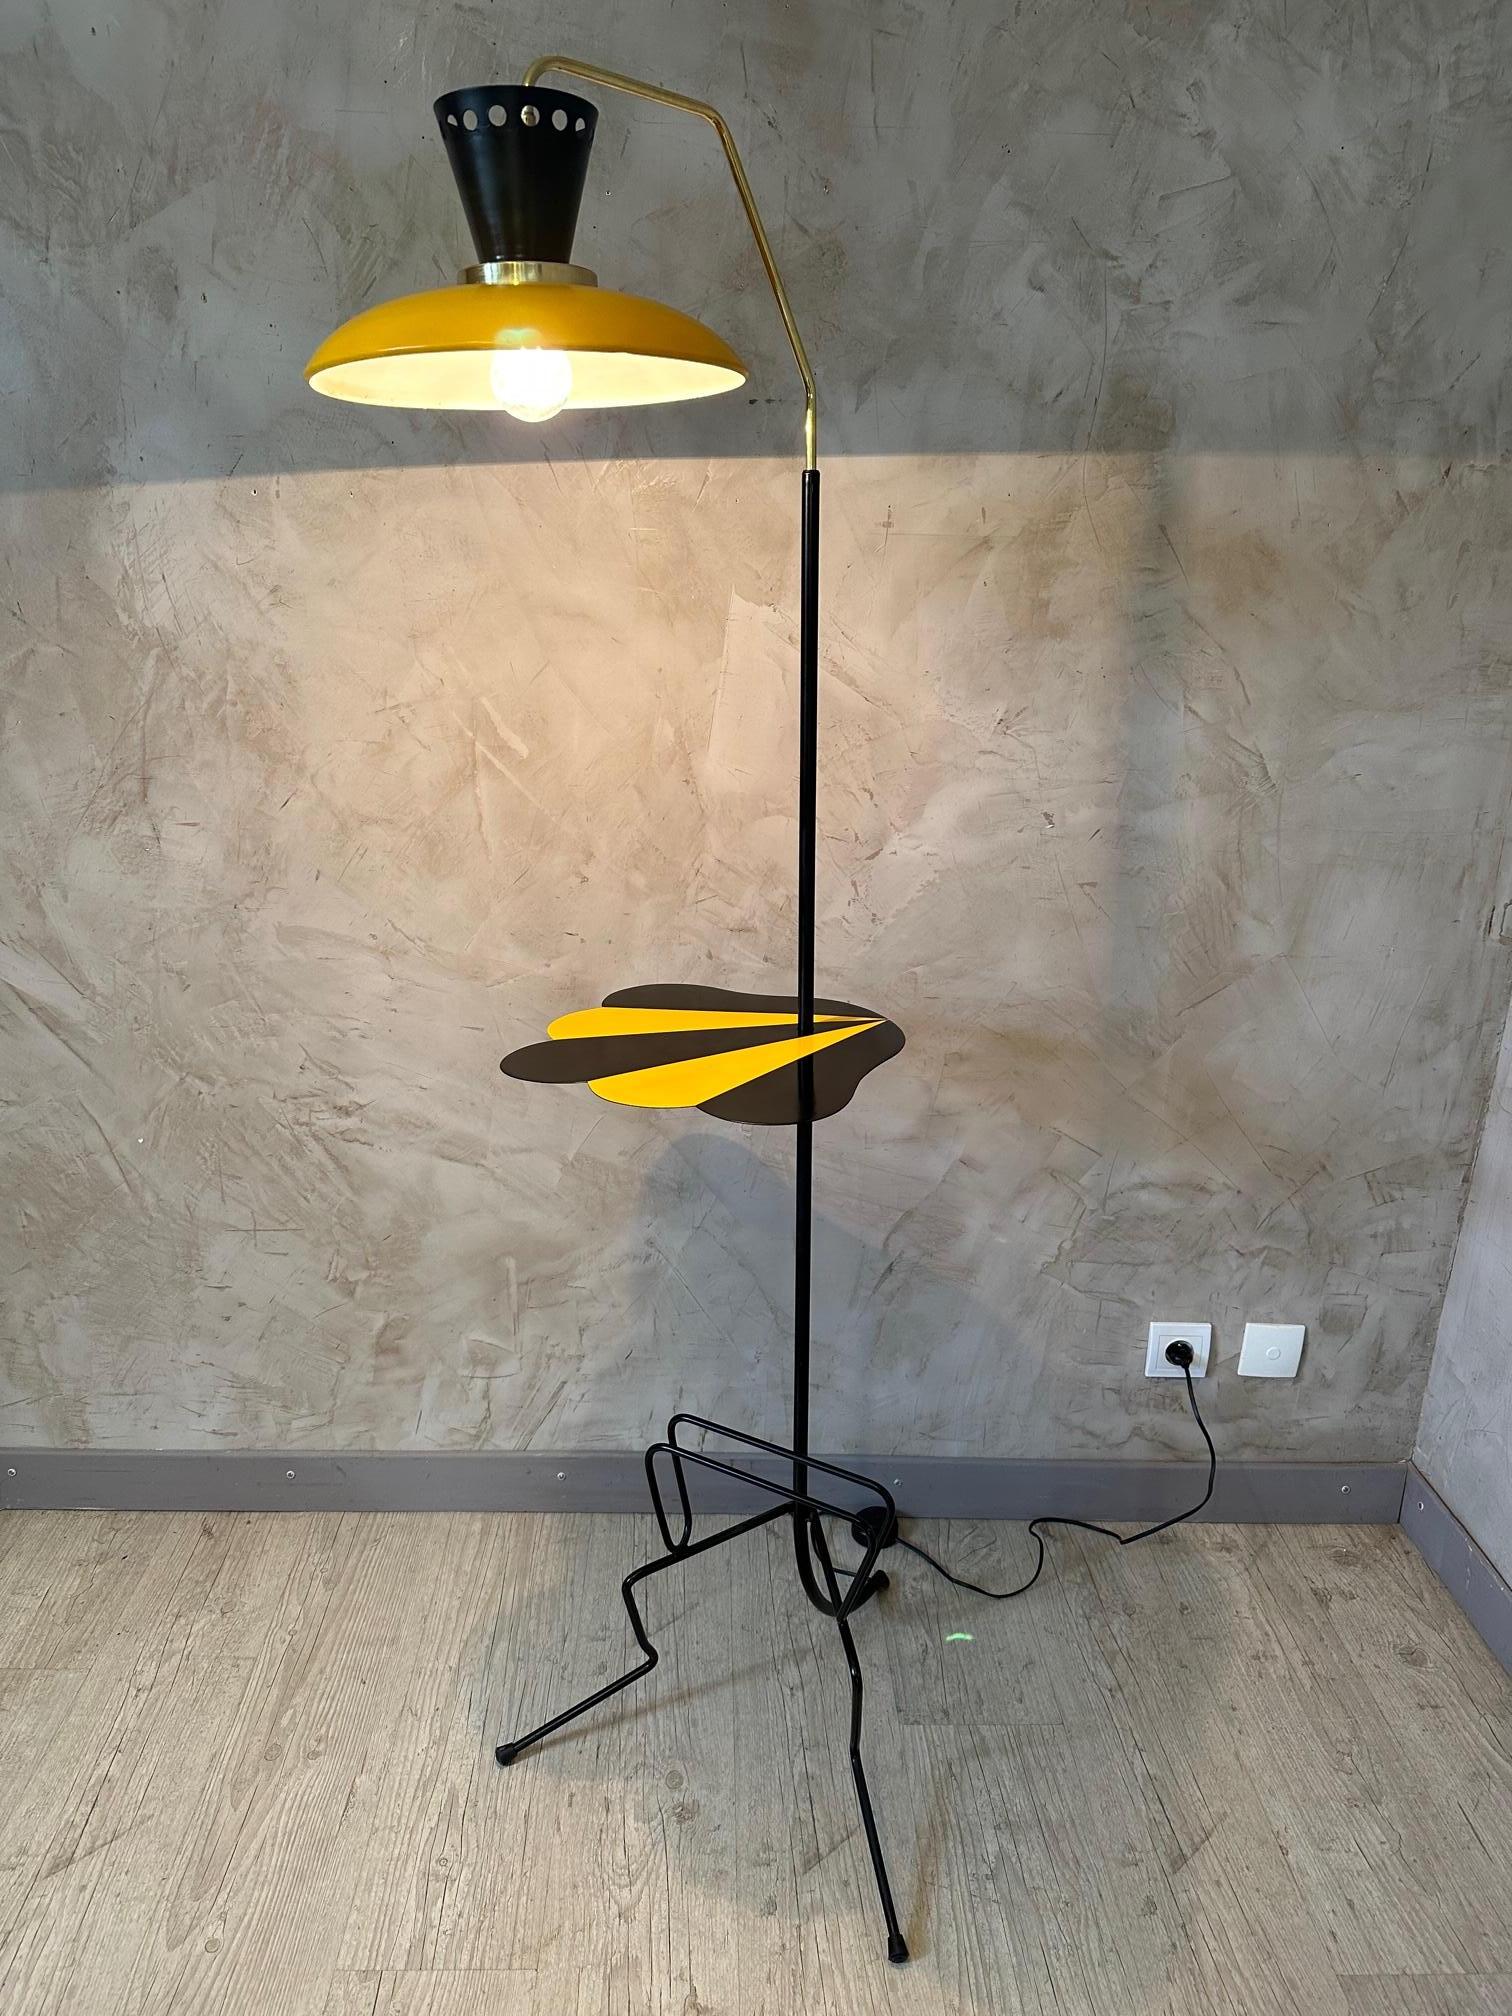 Very beautiful and unique vintage floor lamp from the 60s in brass and metal.
Mid-height enameled metal tray in the shape of a black and yellow rotating shell allowing you to place a book or a glass.
Black and yellow metal lampshade and brass